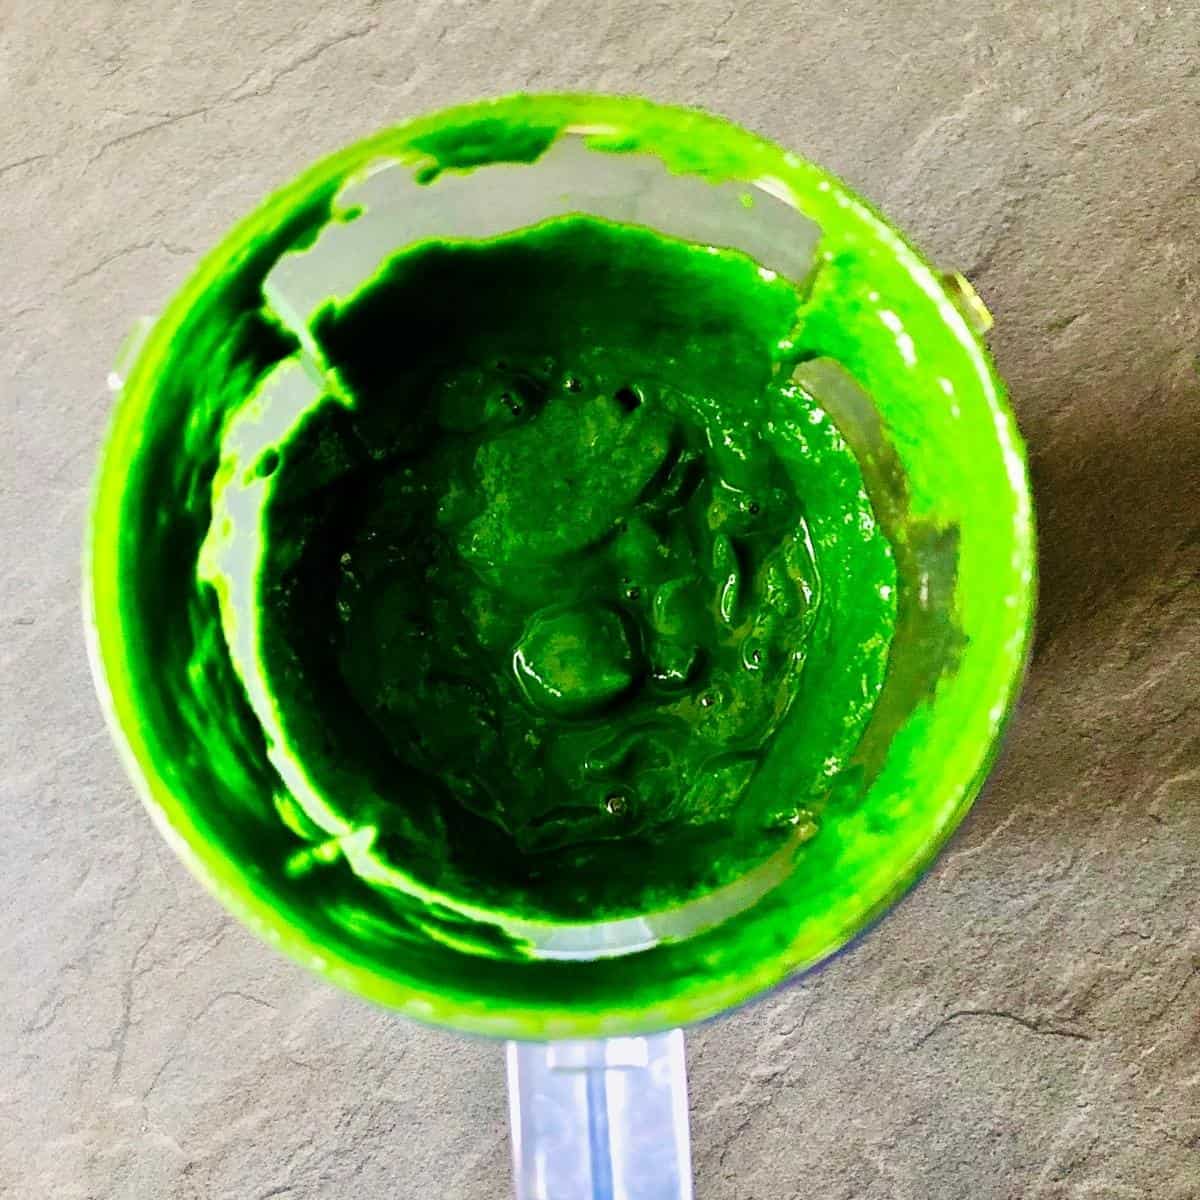 A blender cup containing pureed spinach for palak paneer